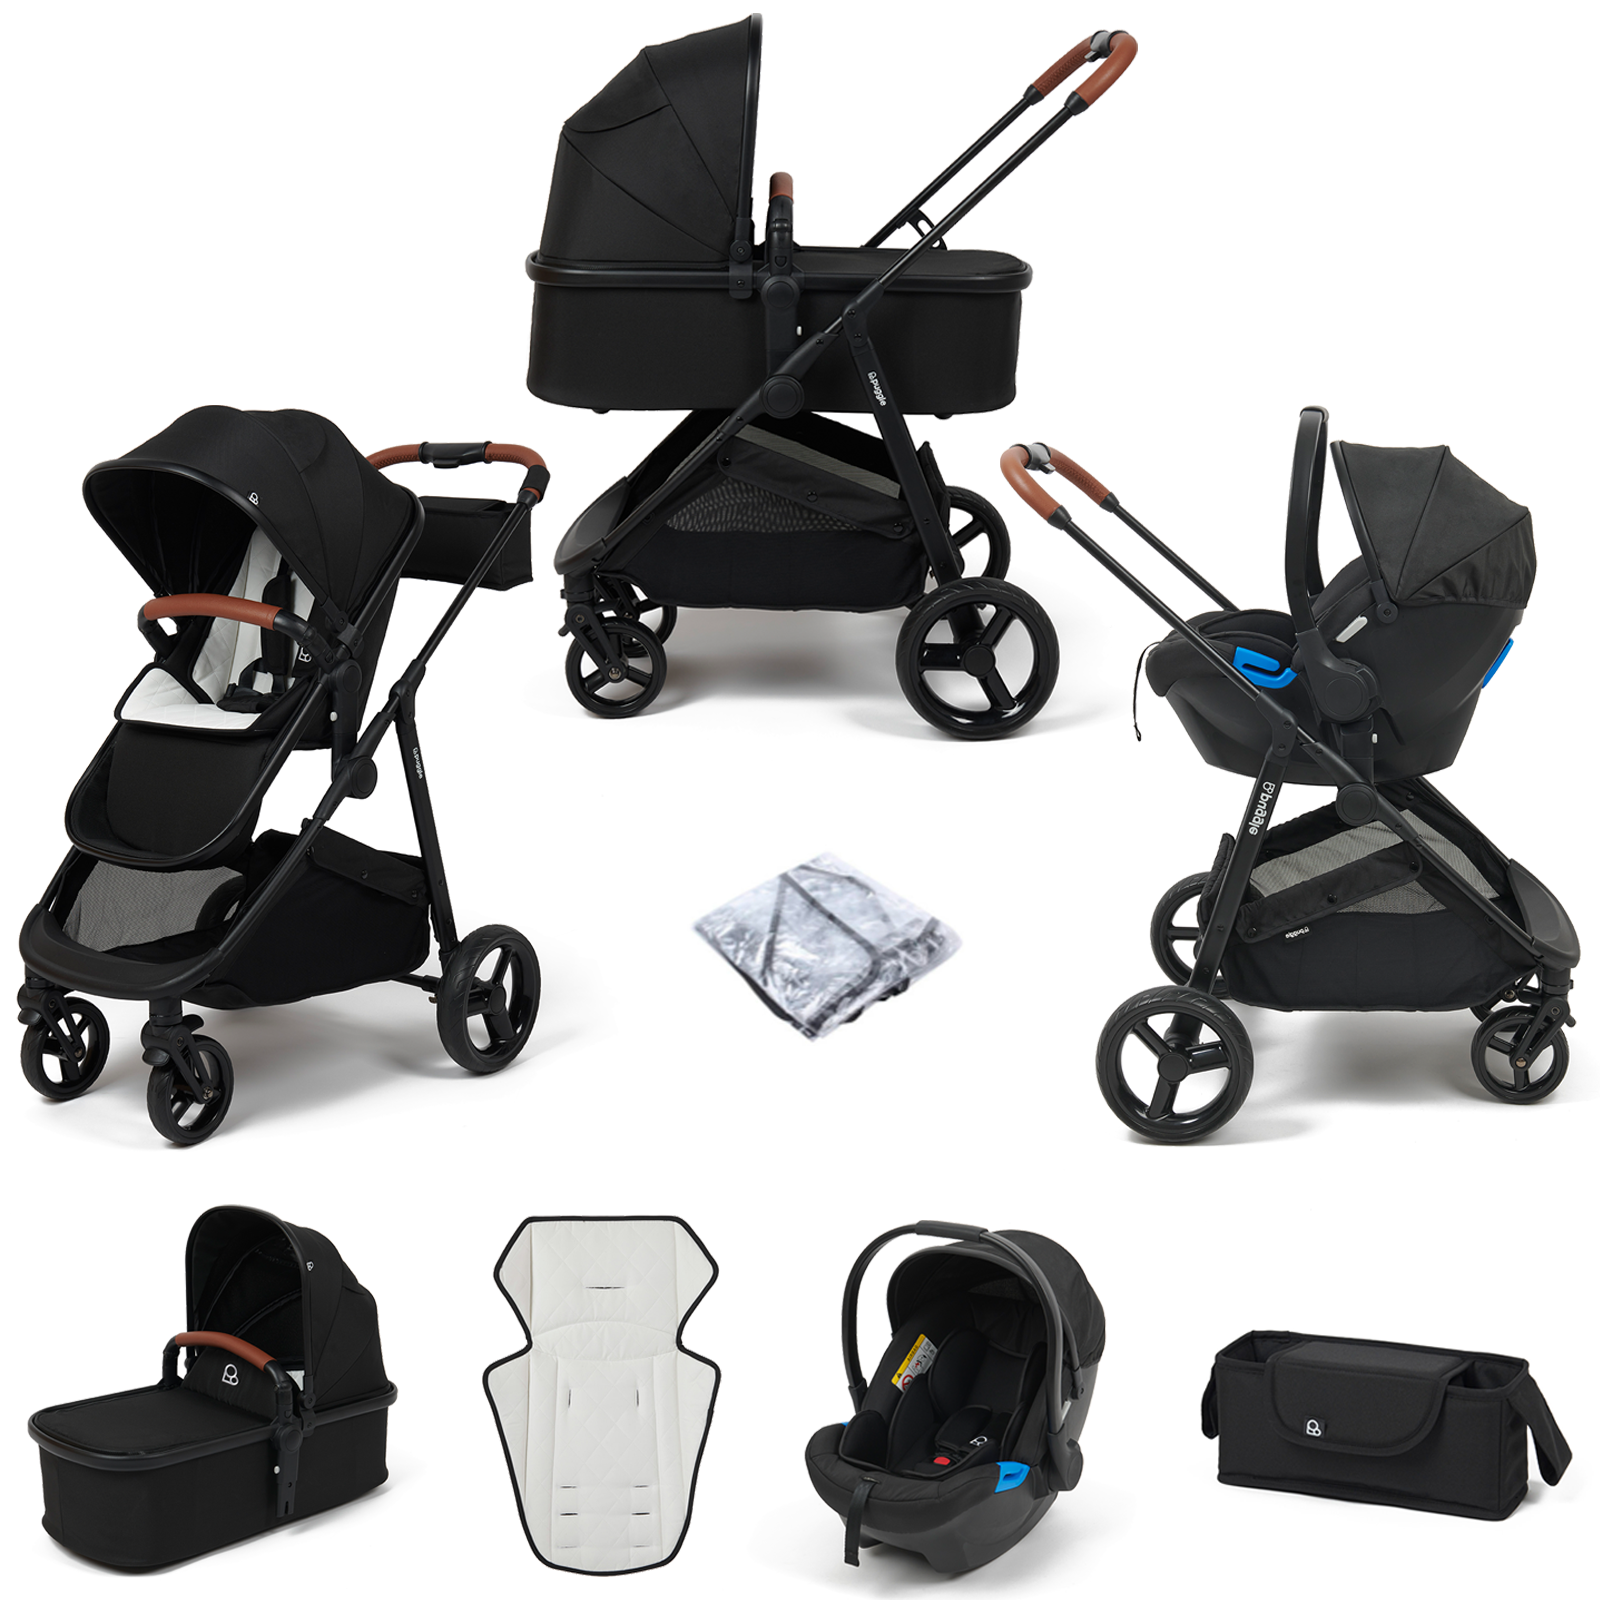 Puggle Monaco XT 3in1 Travel System with Organiser - Storm Black